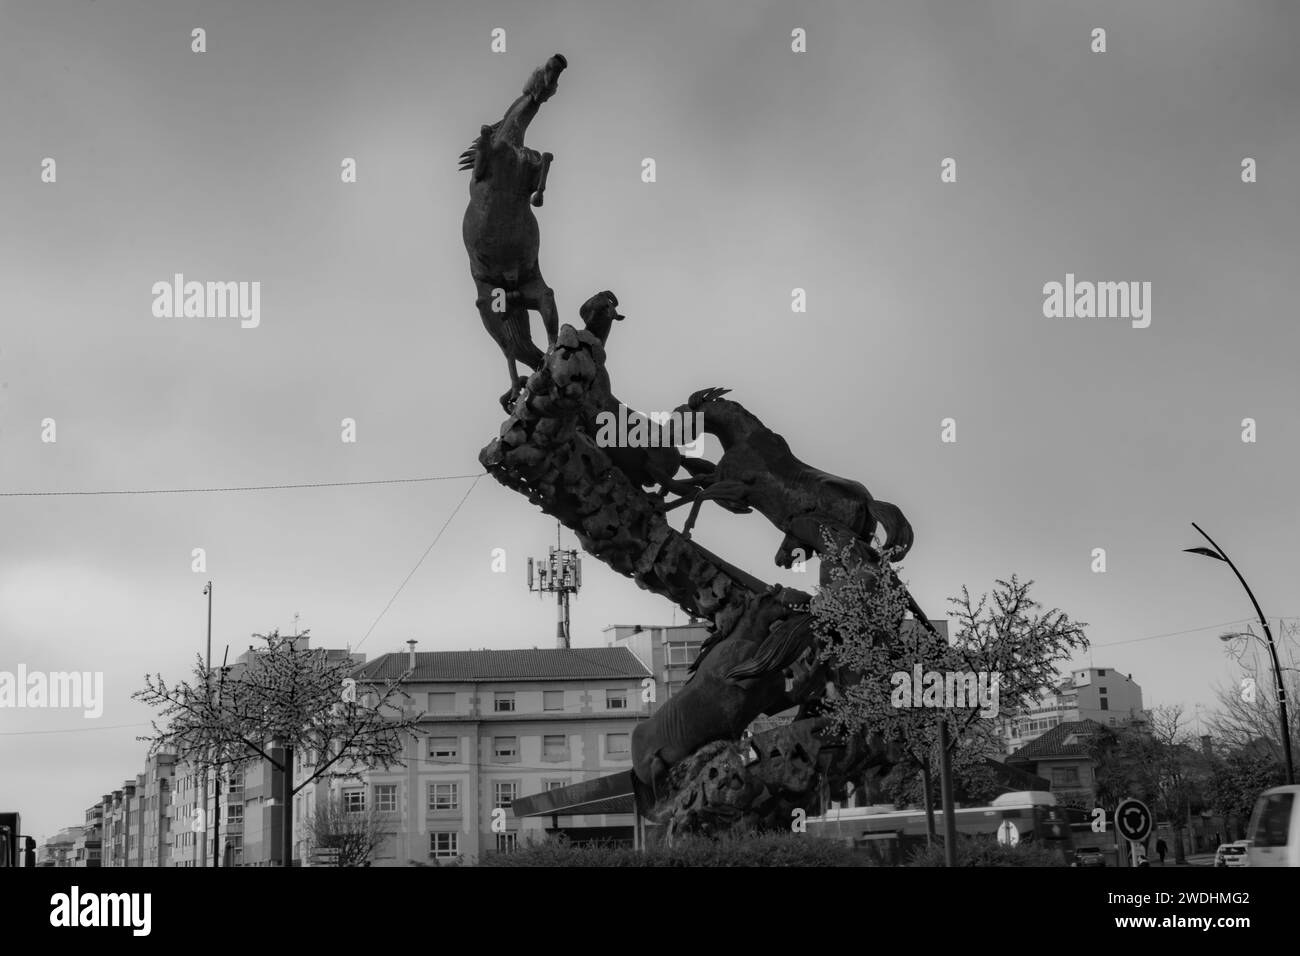 VIGO, SPAIN-December,30,2021: Sculptural group in black bronze forms a kind of ascending metallic spiral that reaches 18 meters in height Stock Photo